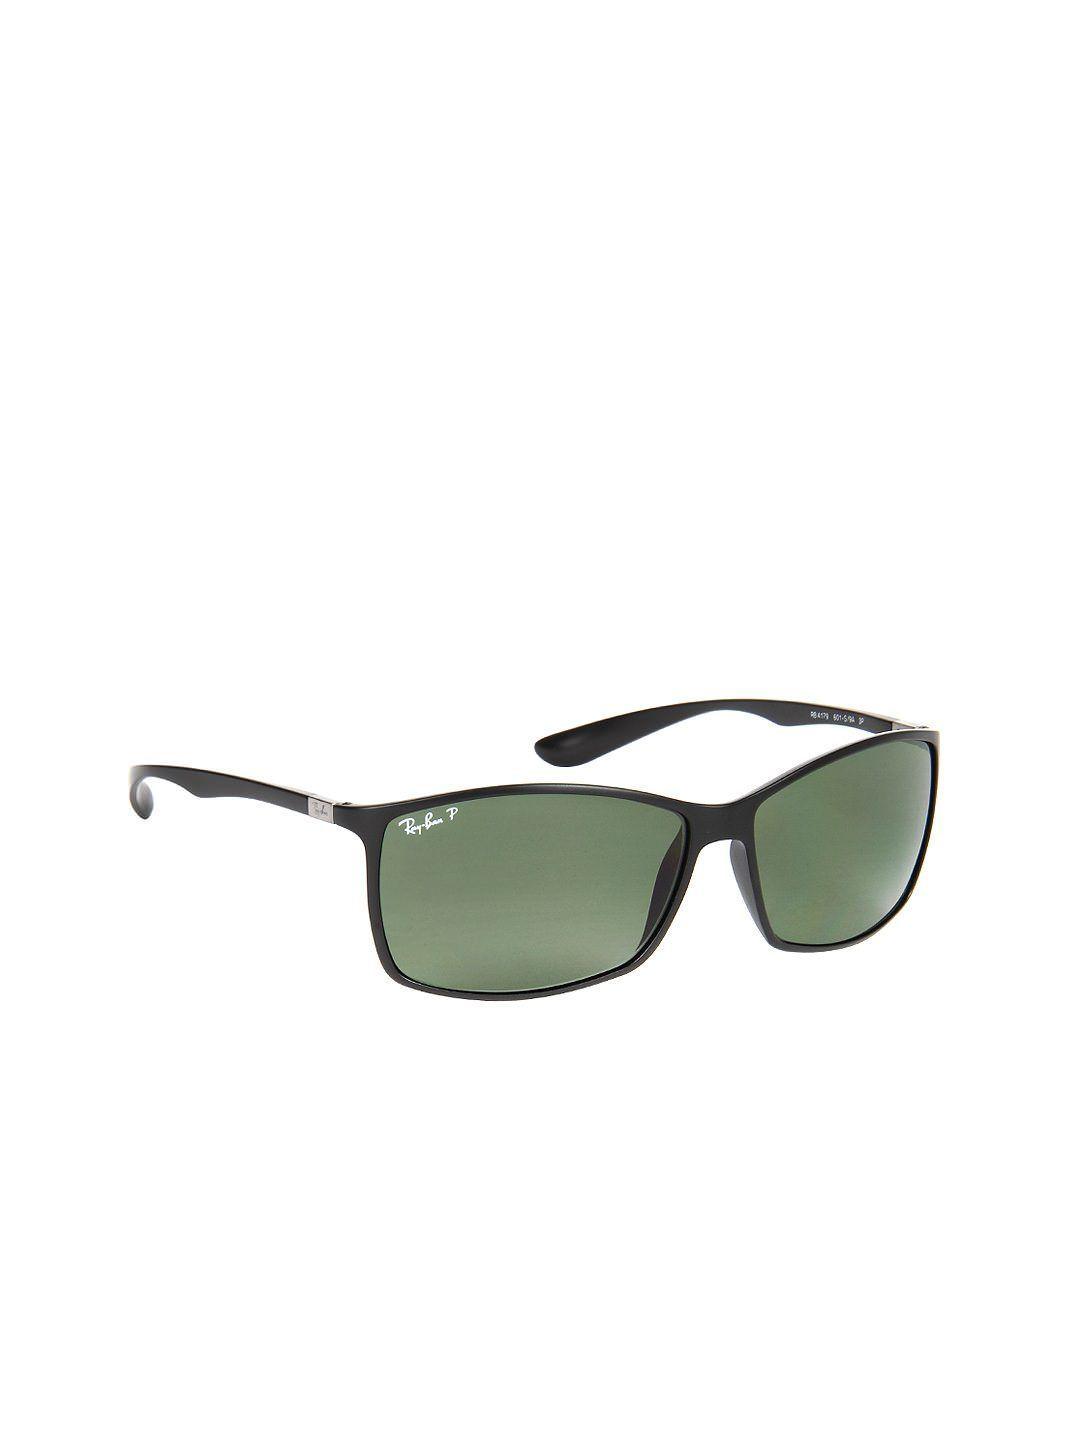 ray-ban tech liteforce unisex sunglasses 0rb4179